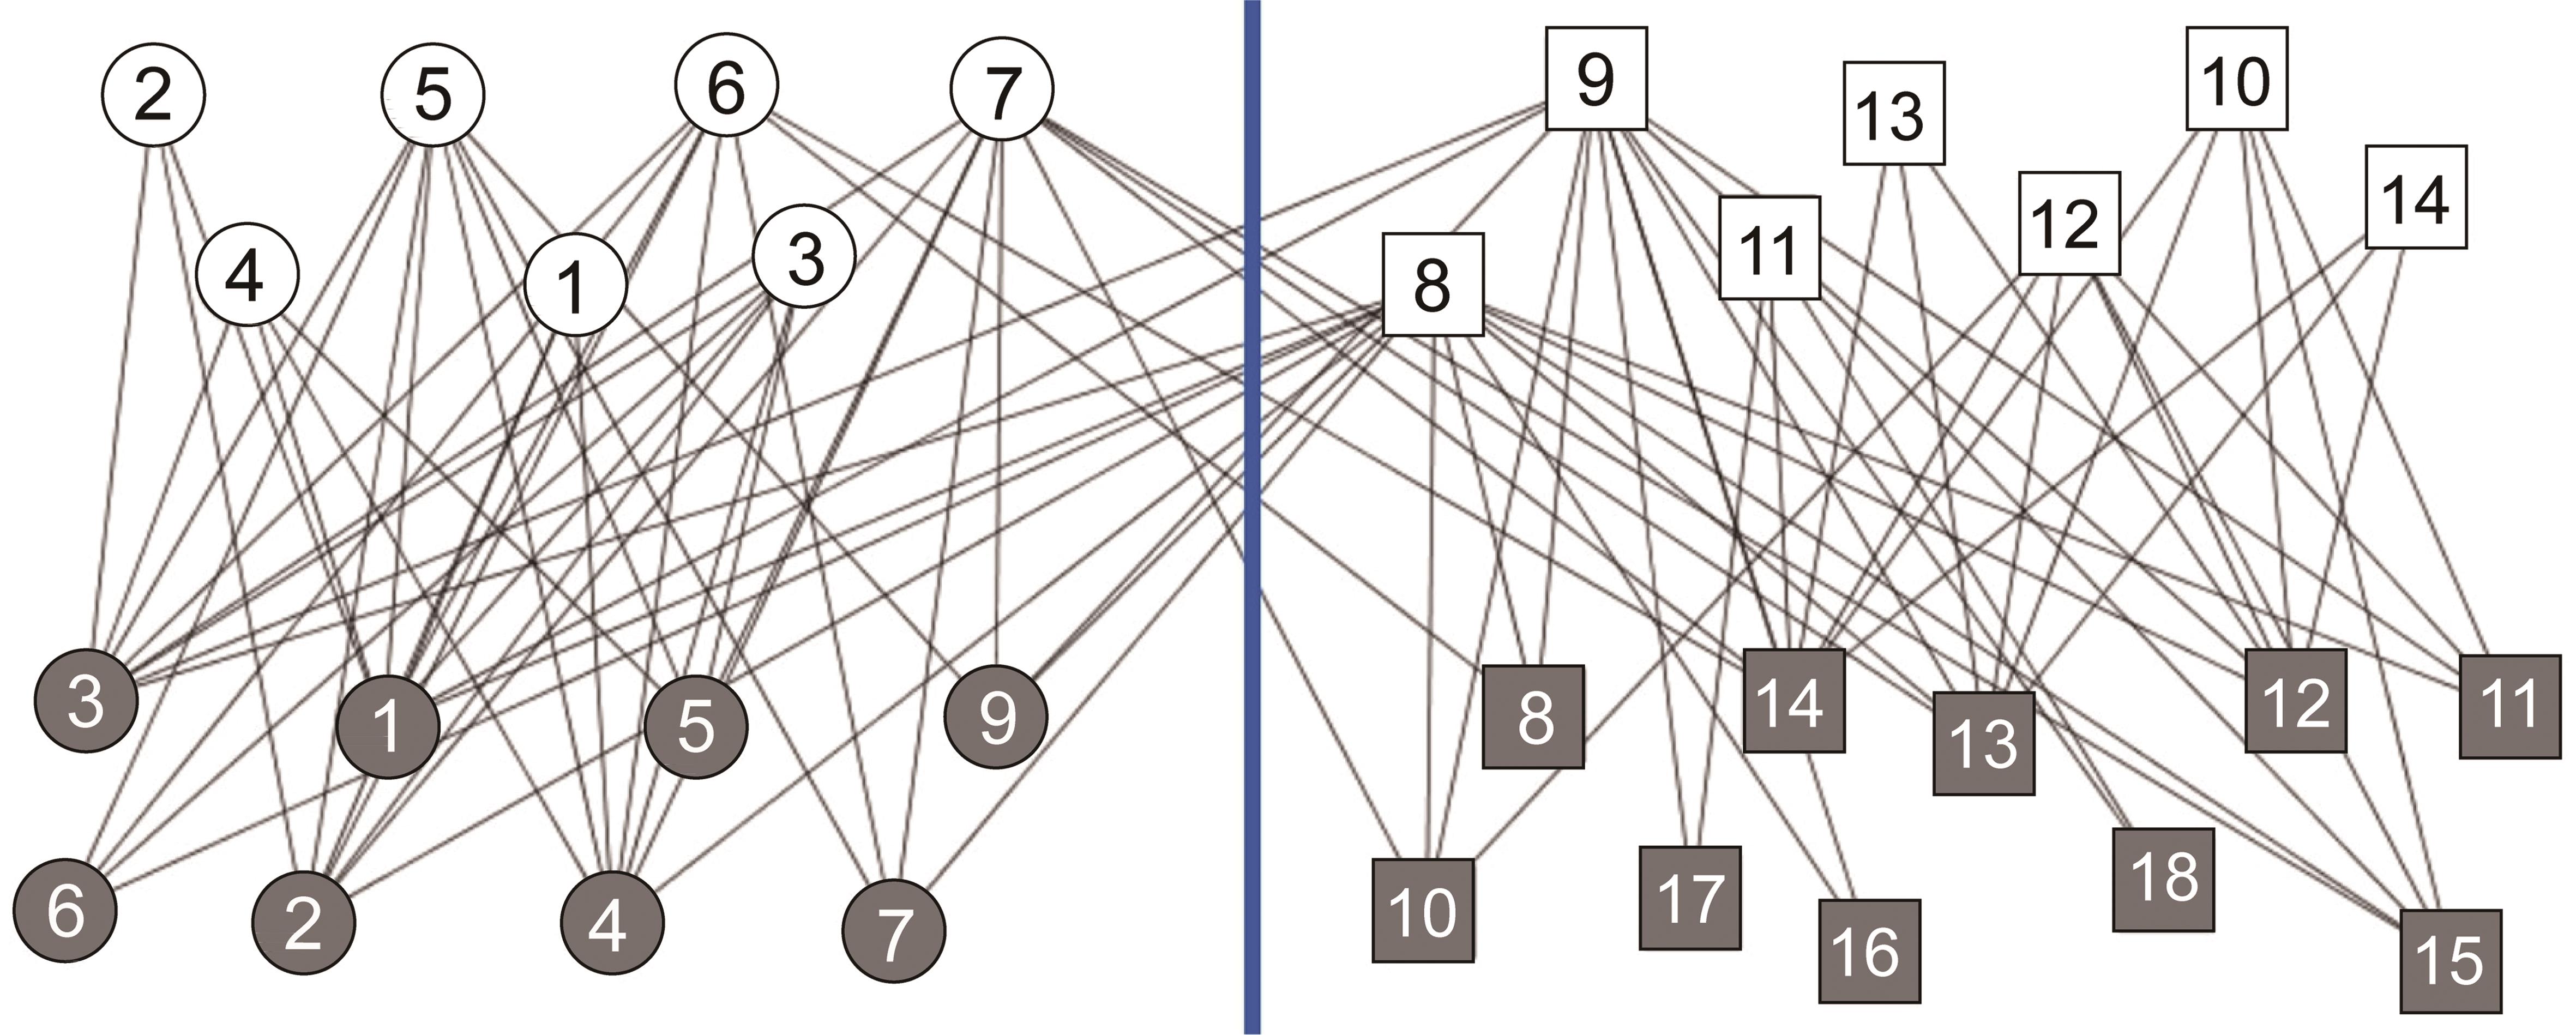 Liu and Murata community assignment for Southern women bipartite graph.